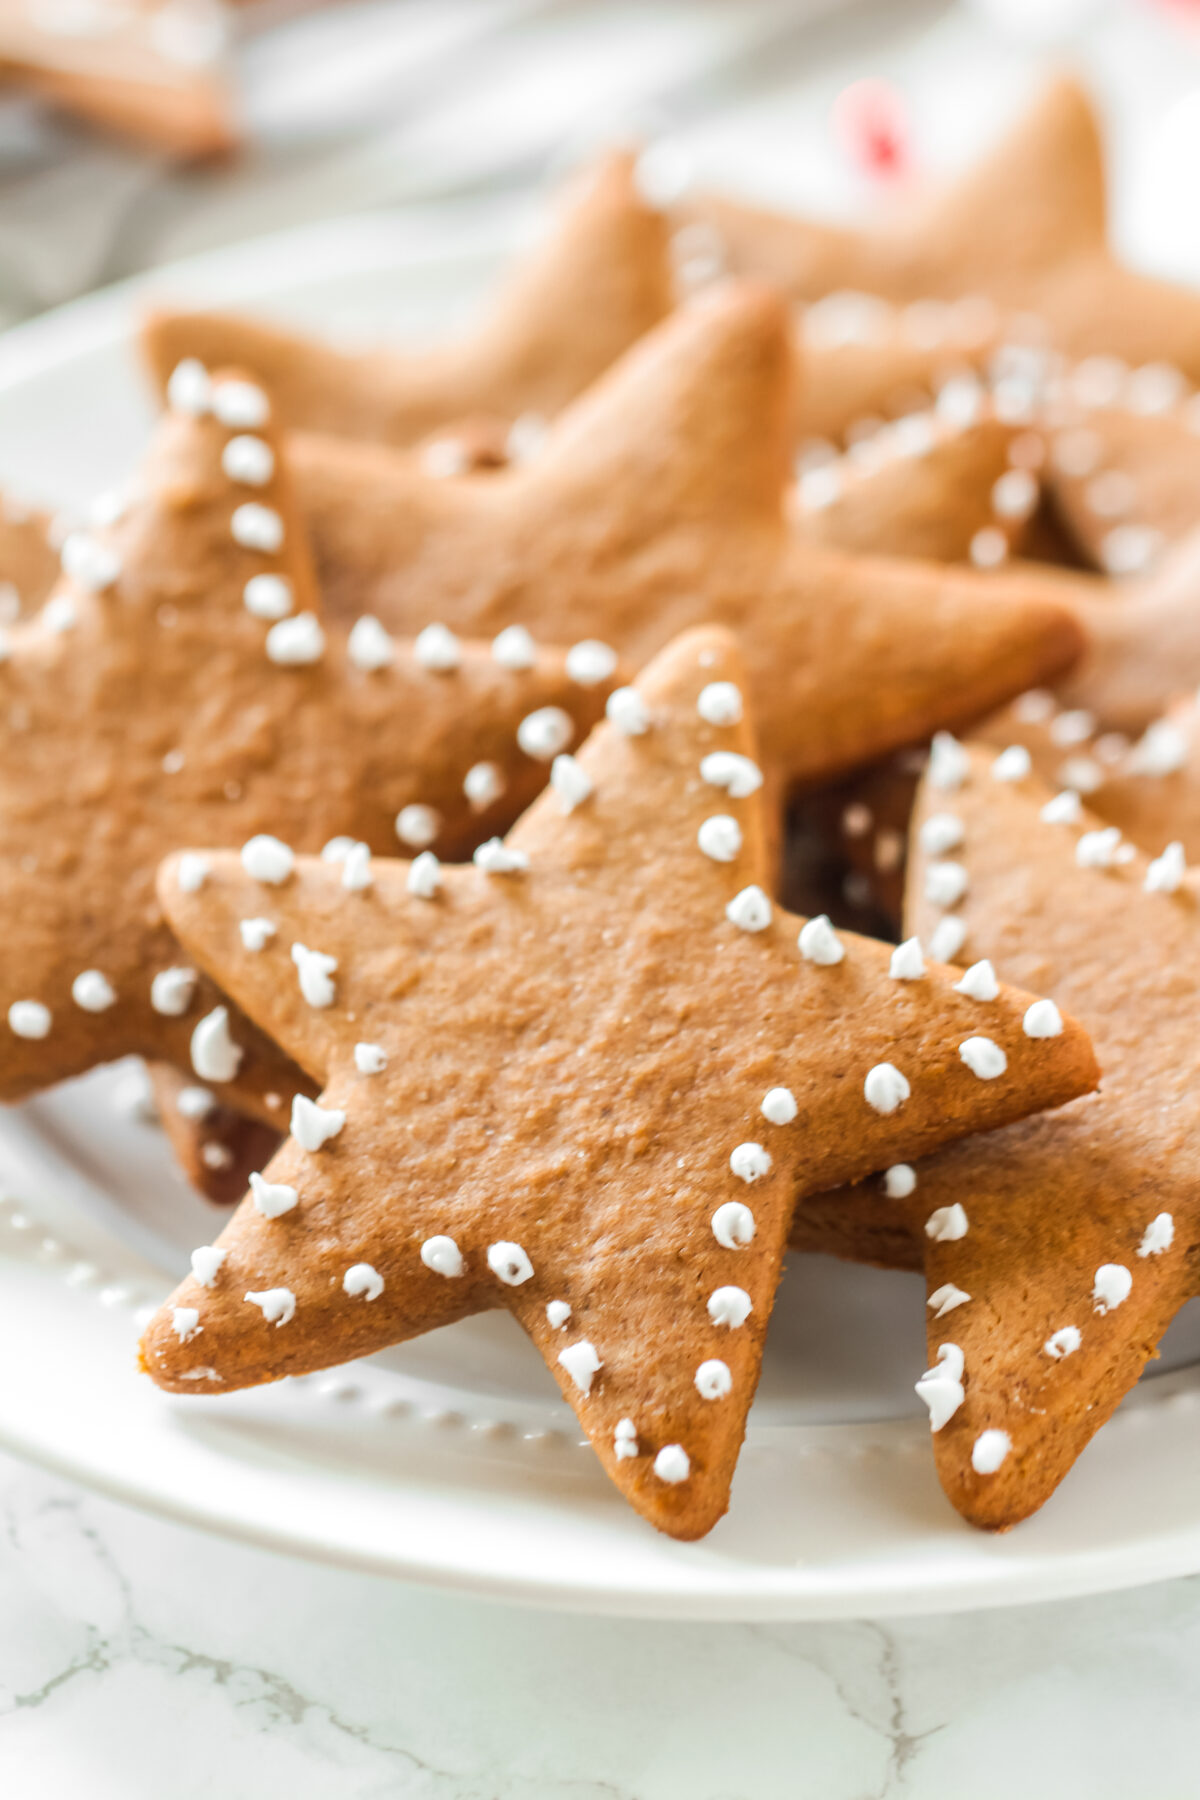 This Christmas gingerbread star cookies recipe is so easy to make and it's the perfect treat for your holiday cookie platter.